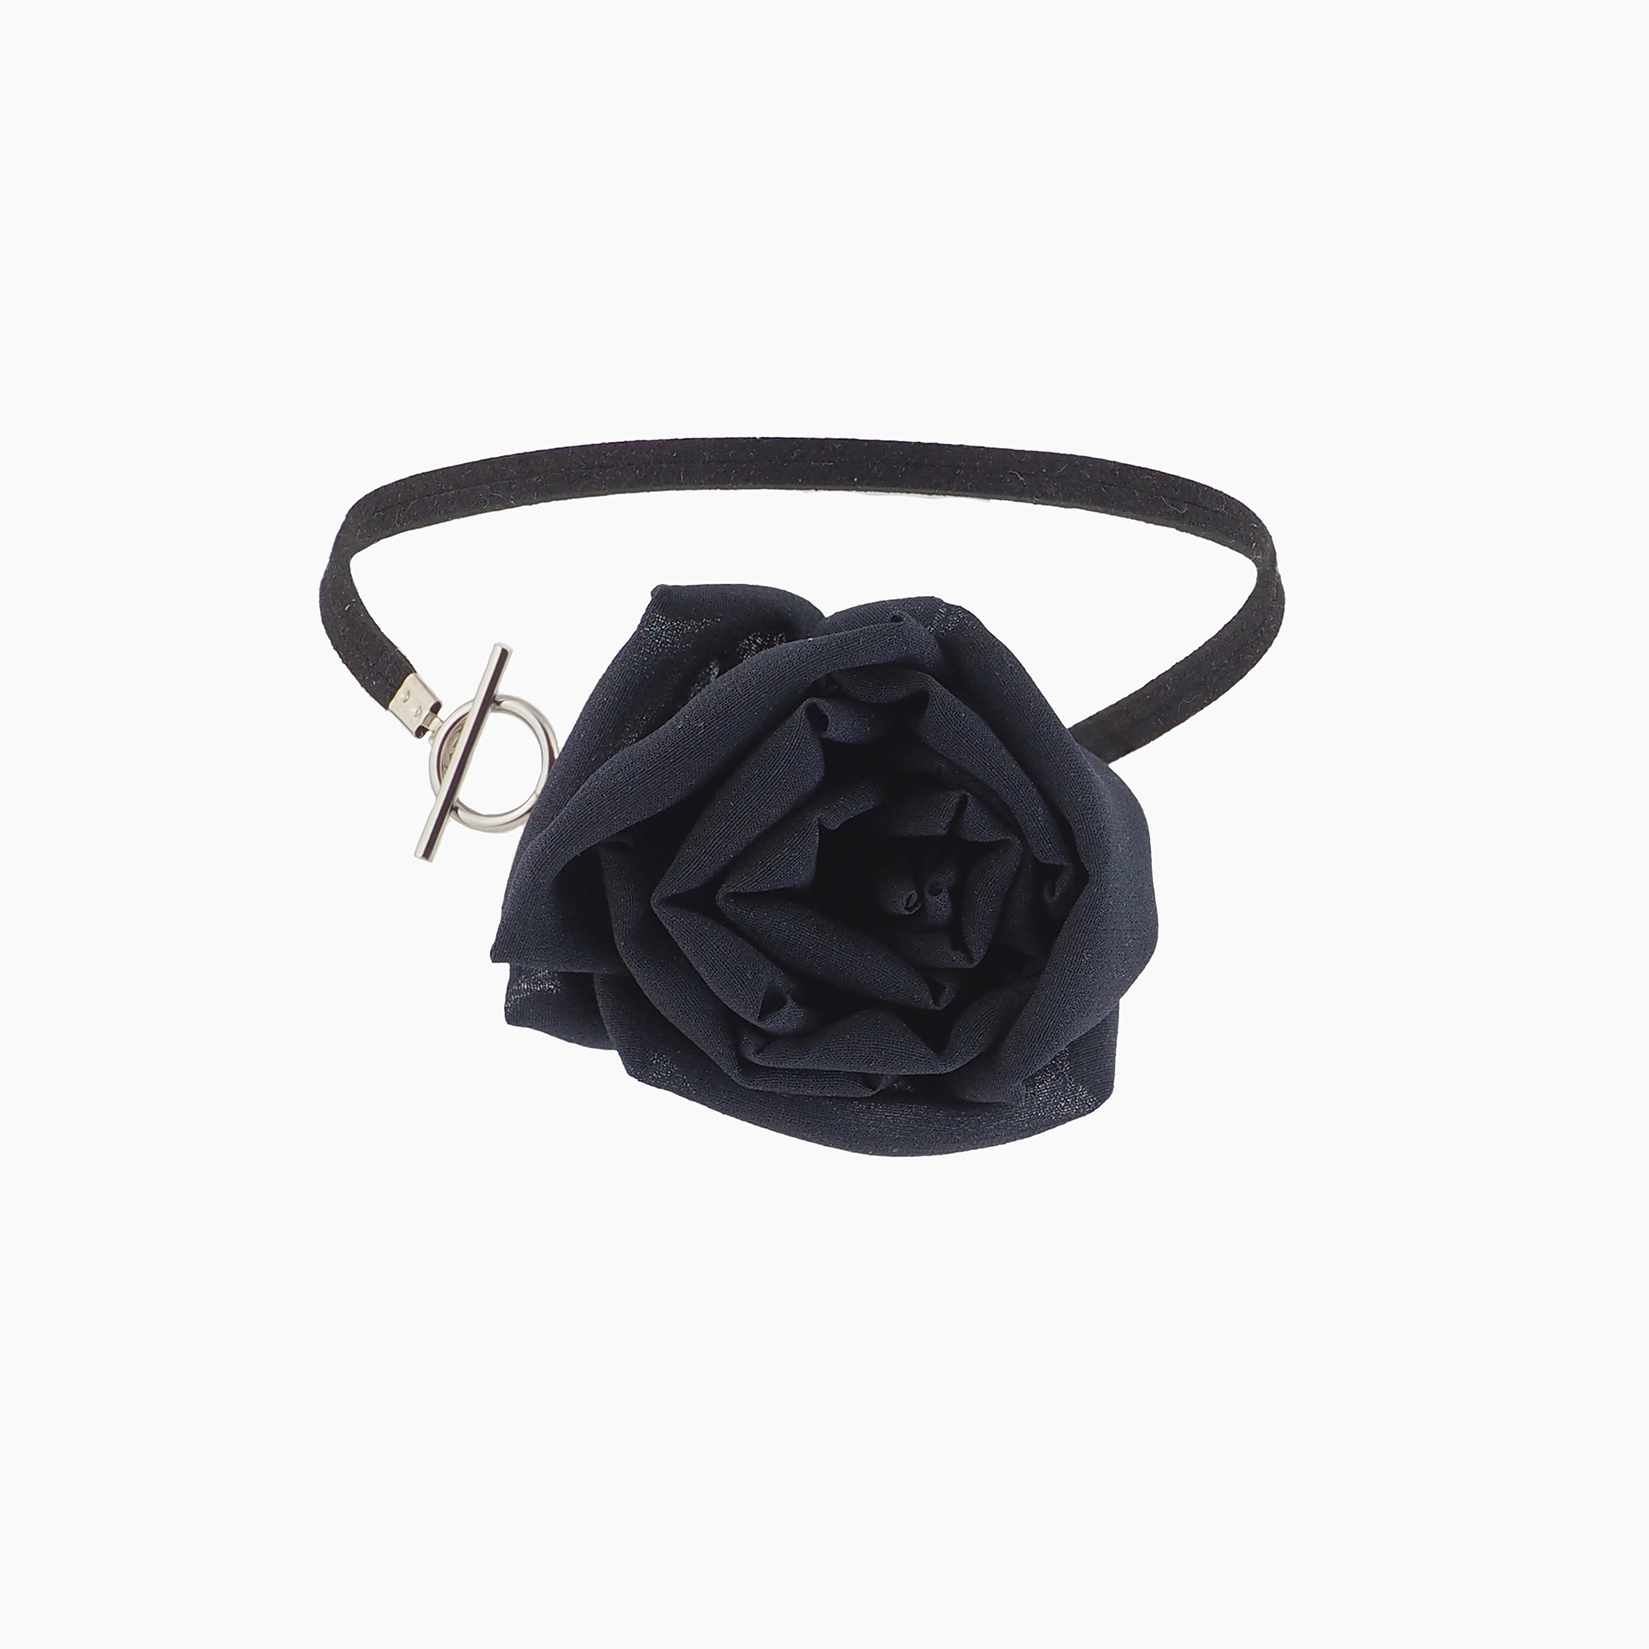 Black Silk Rose Choker Necklace with Toggle Clasp